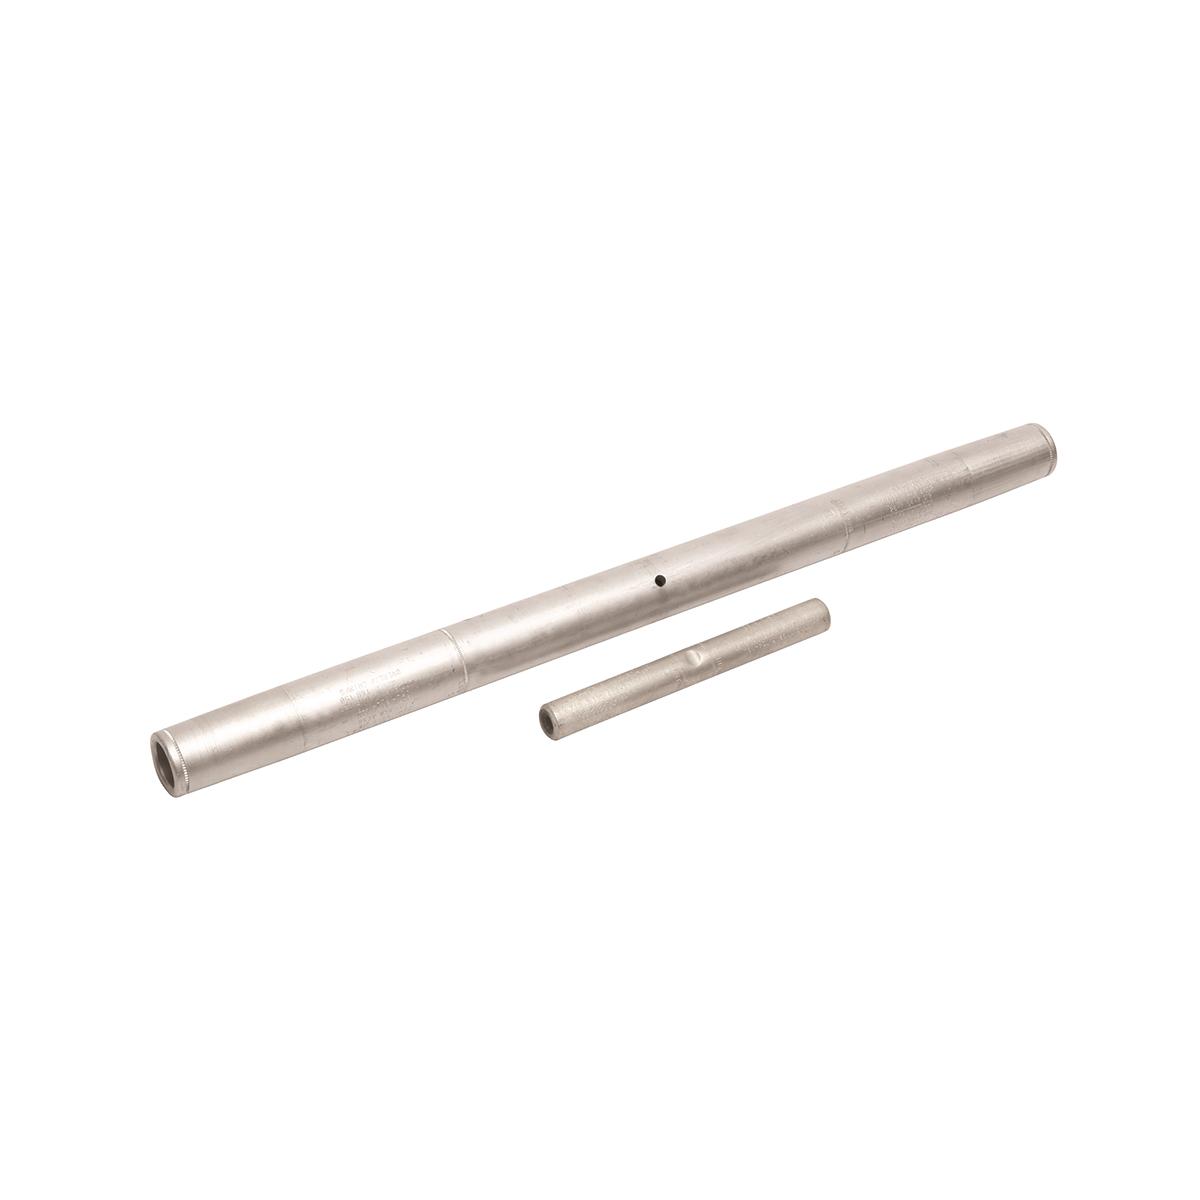 Hubbell YTS59R Aluminum outer sleeve for full tension splice kit, 2156-2167 Kcmil, 735 Index, Outer sleeve for Hysplices provides gradual transition of stress. 